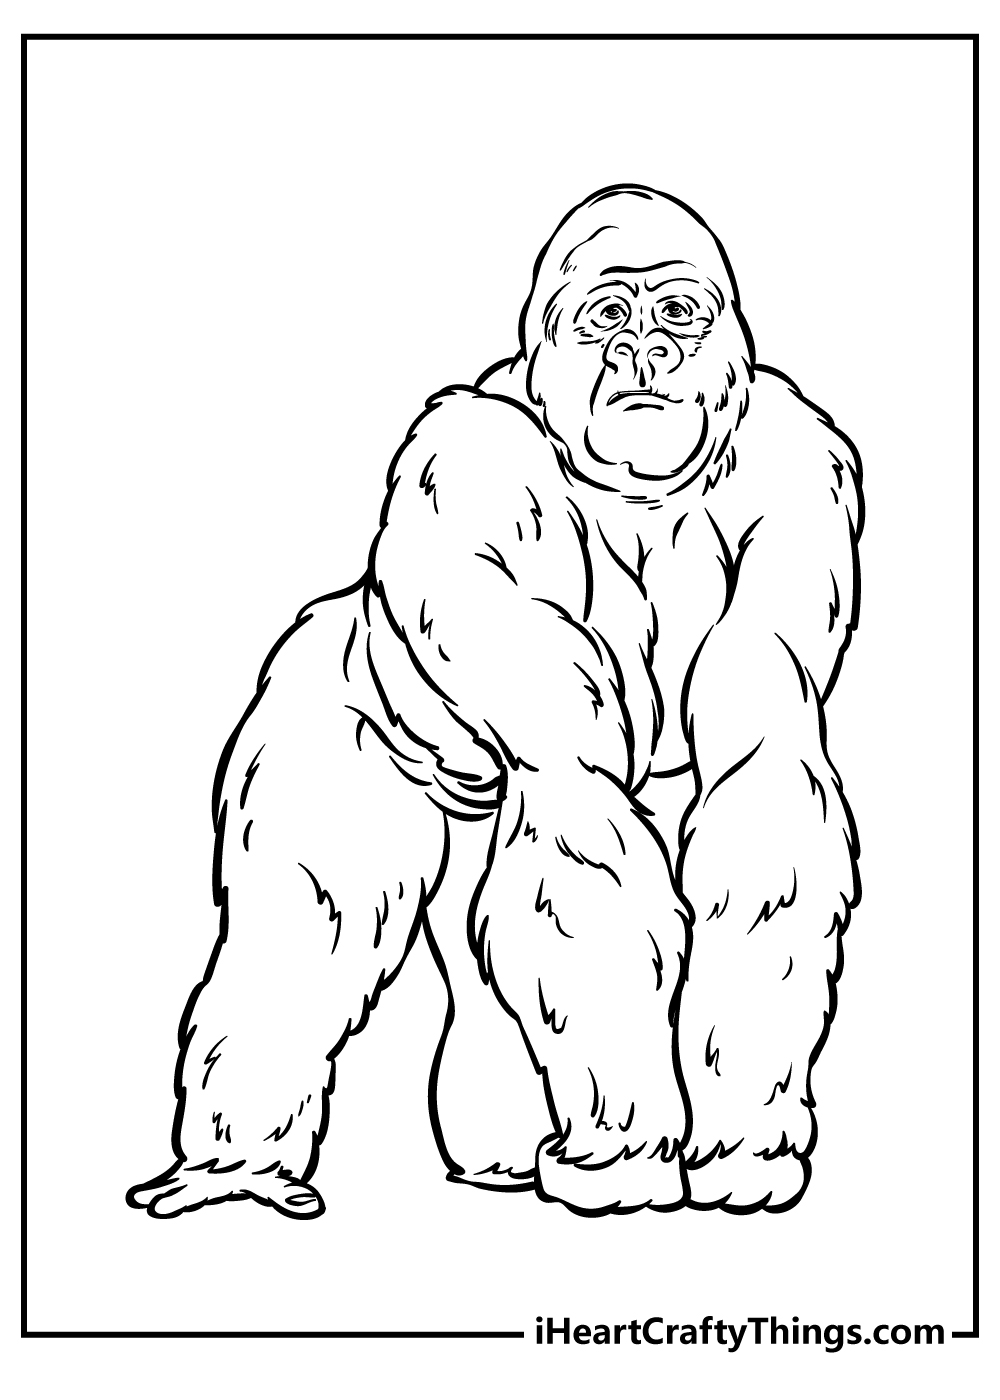 Zoo Animals Coloring Pages for kids free download